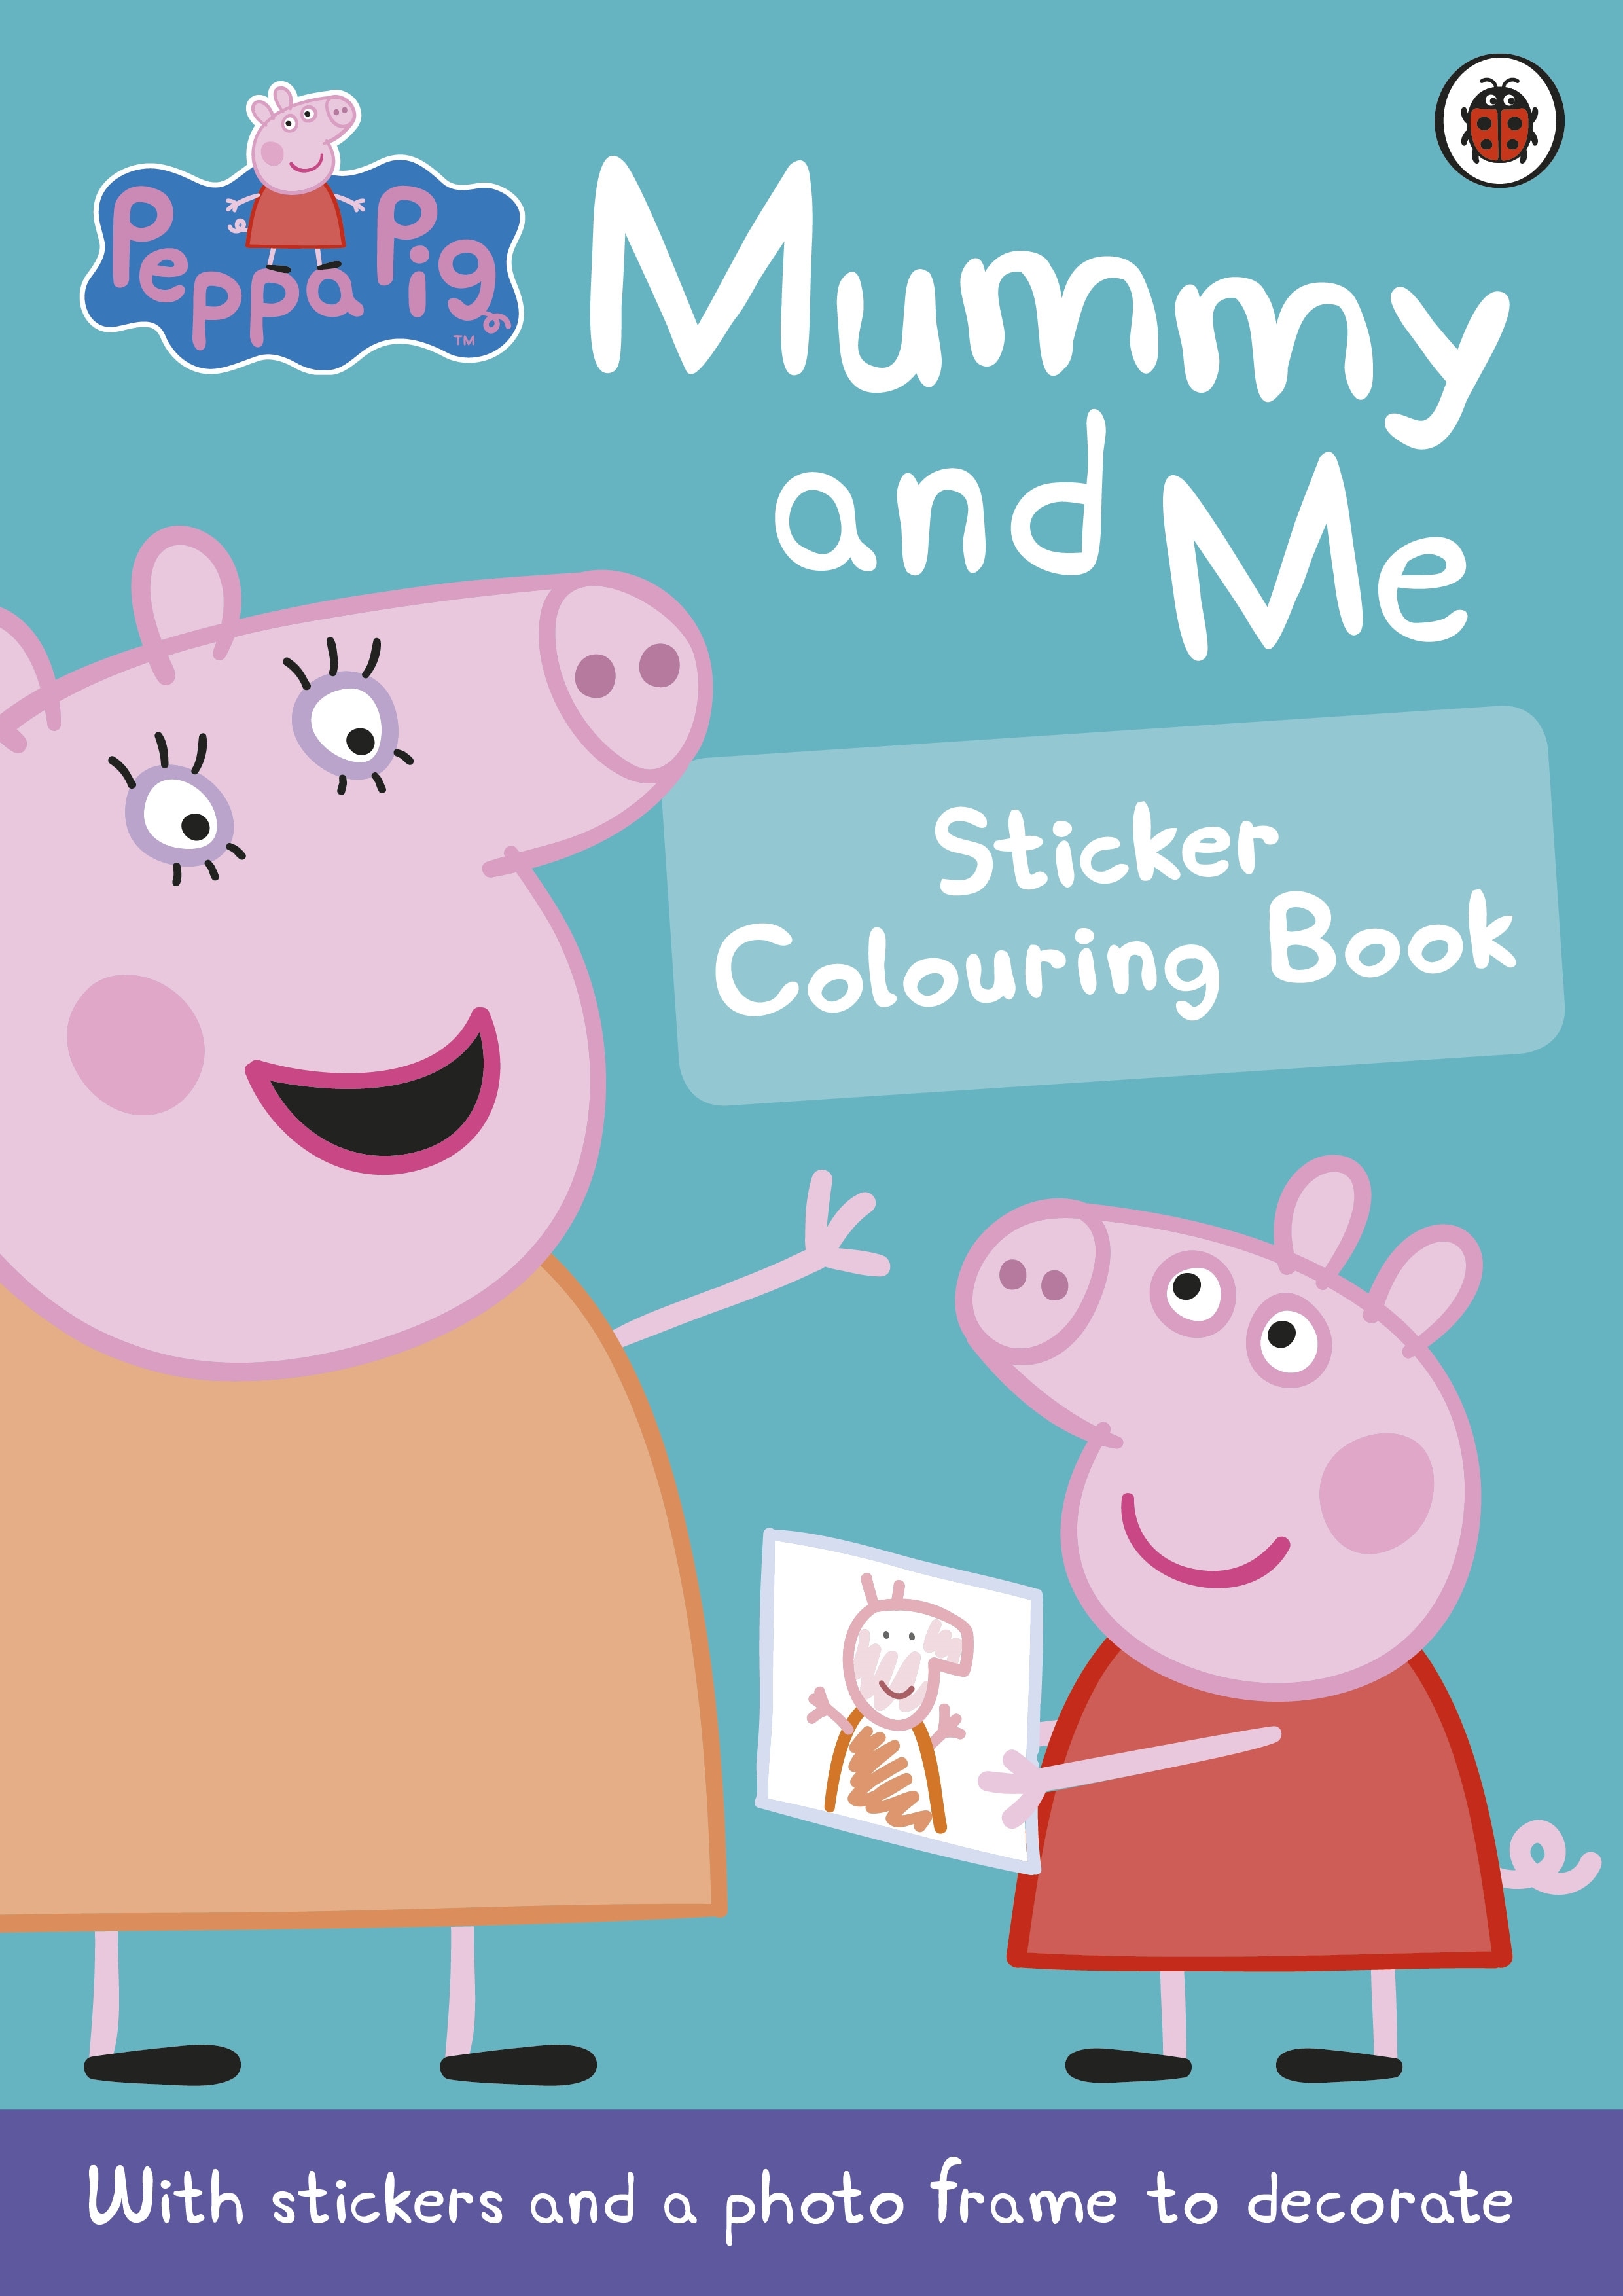 Book “Peppa Pig: Mummy and Me Sticker Colouring Book” by Peppa Pig — February 5, 2015